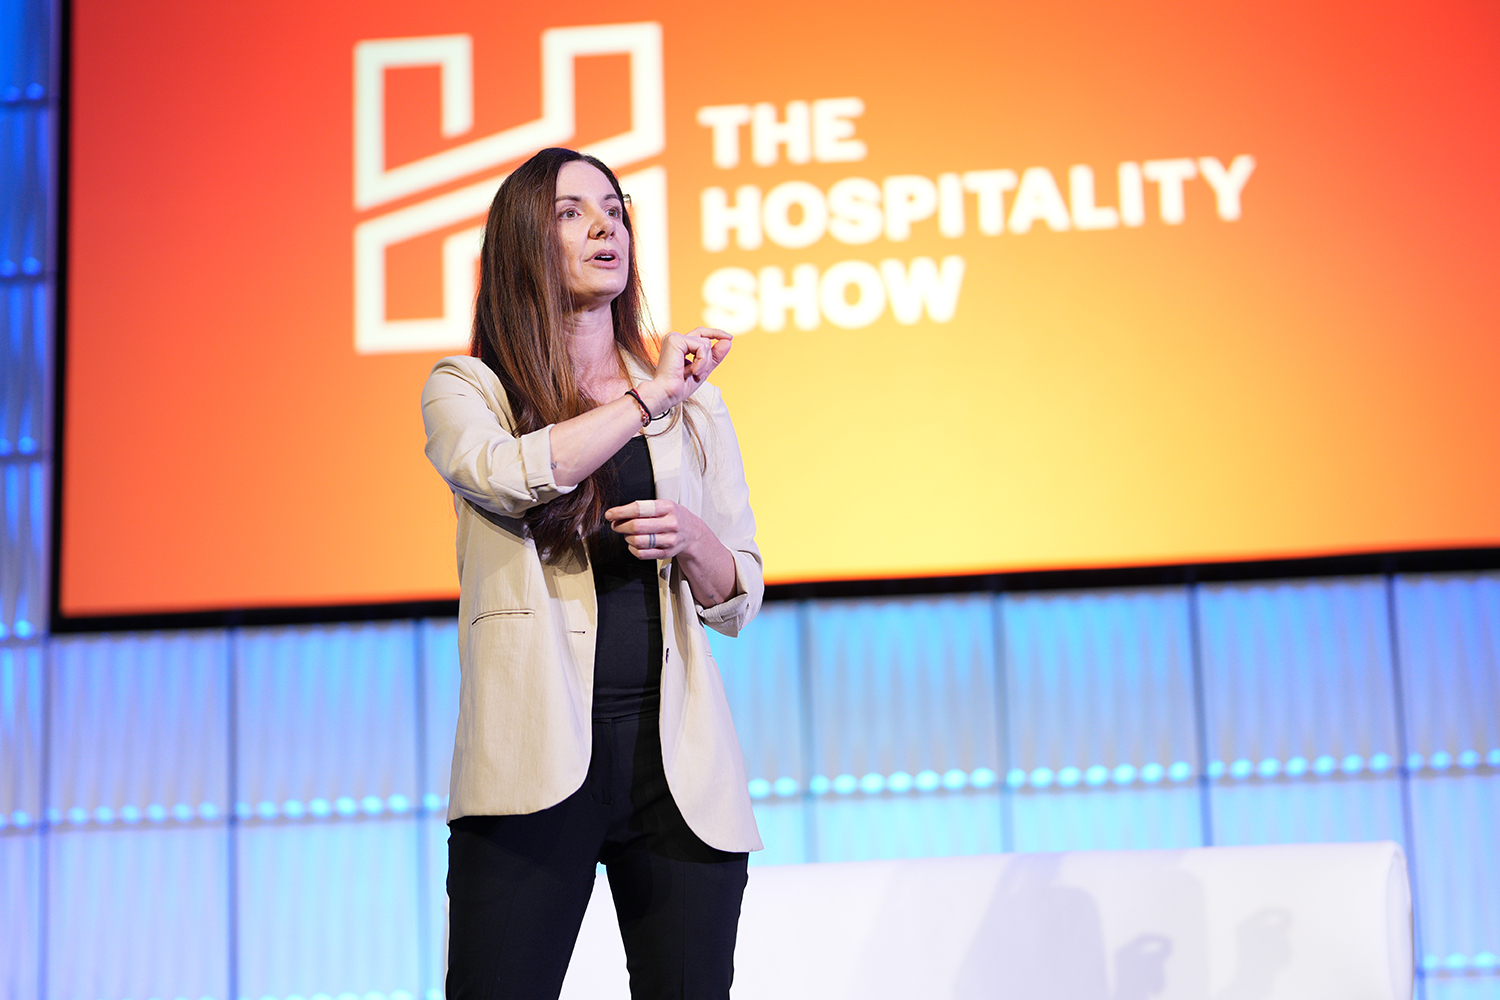 Kat Cole at The Hospitality Show